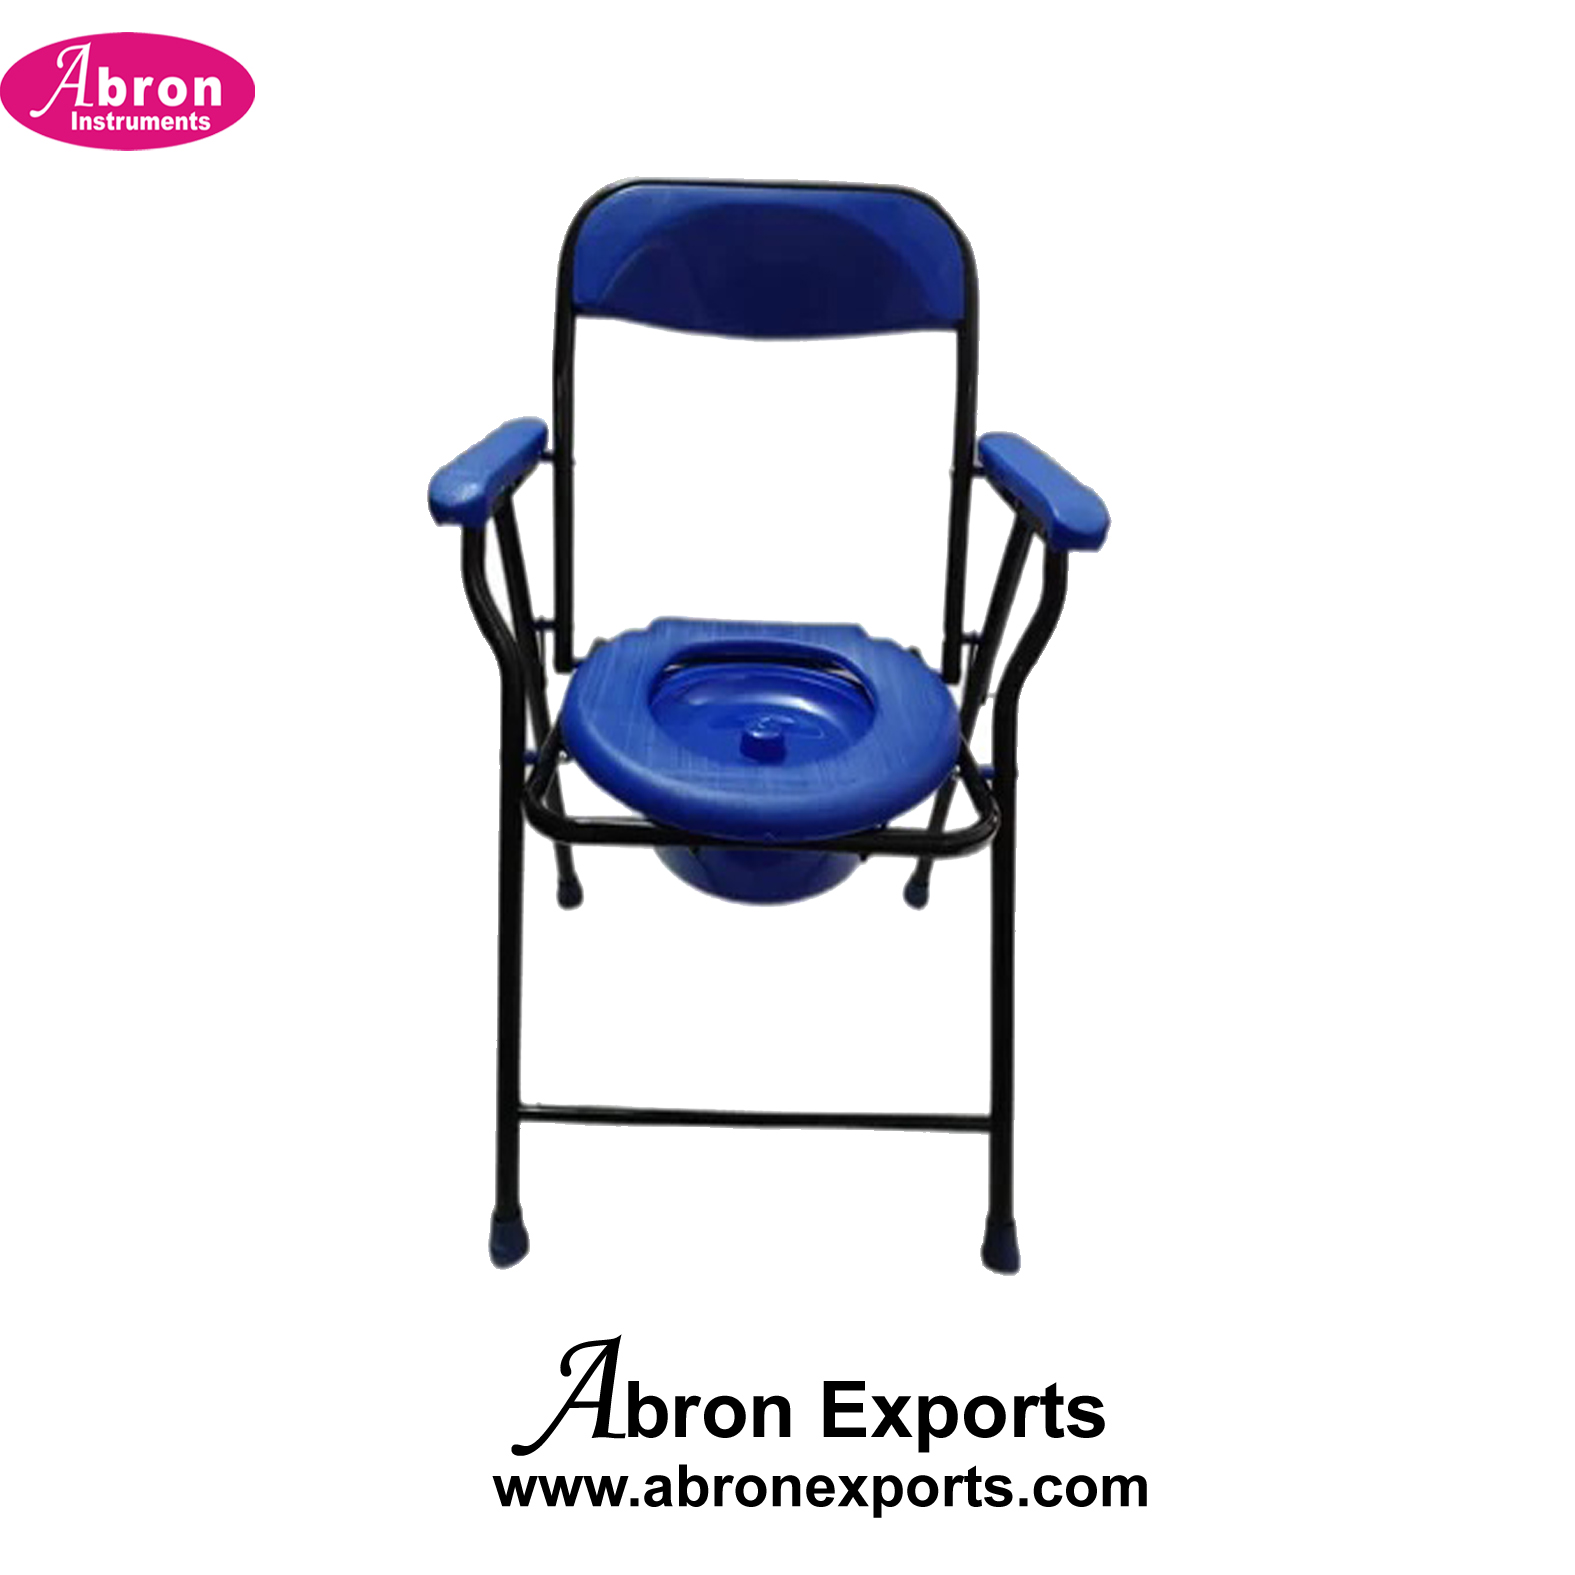 Urine Flow Testing chair micturition chair Commode Light weight steel Hospital Abron ABM-2340CH